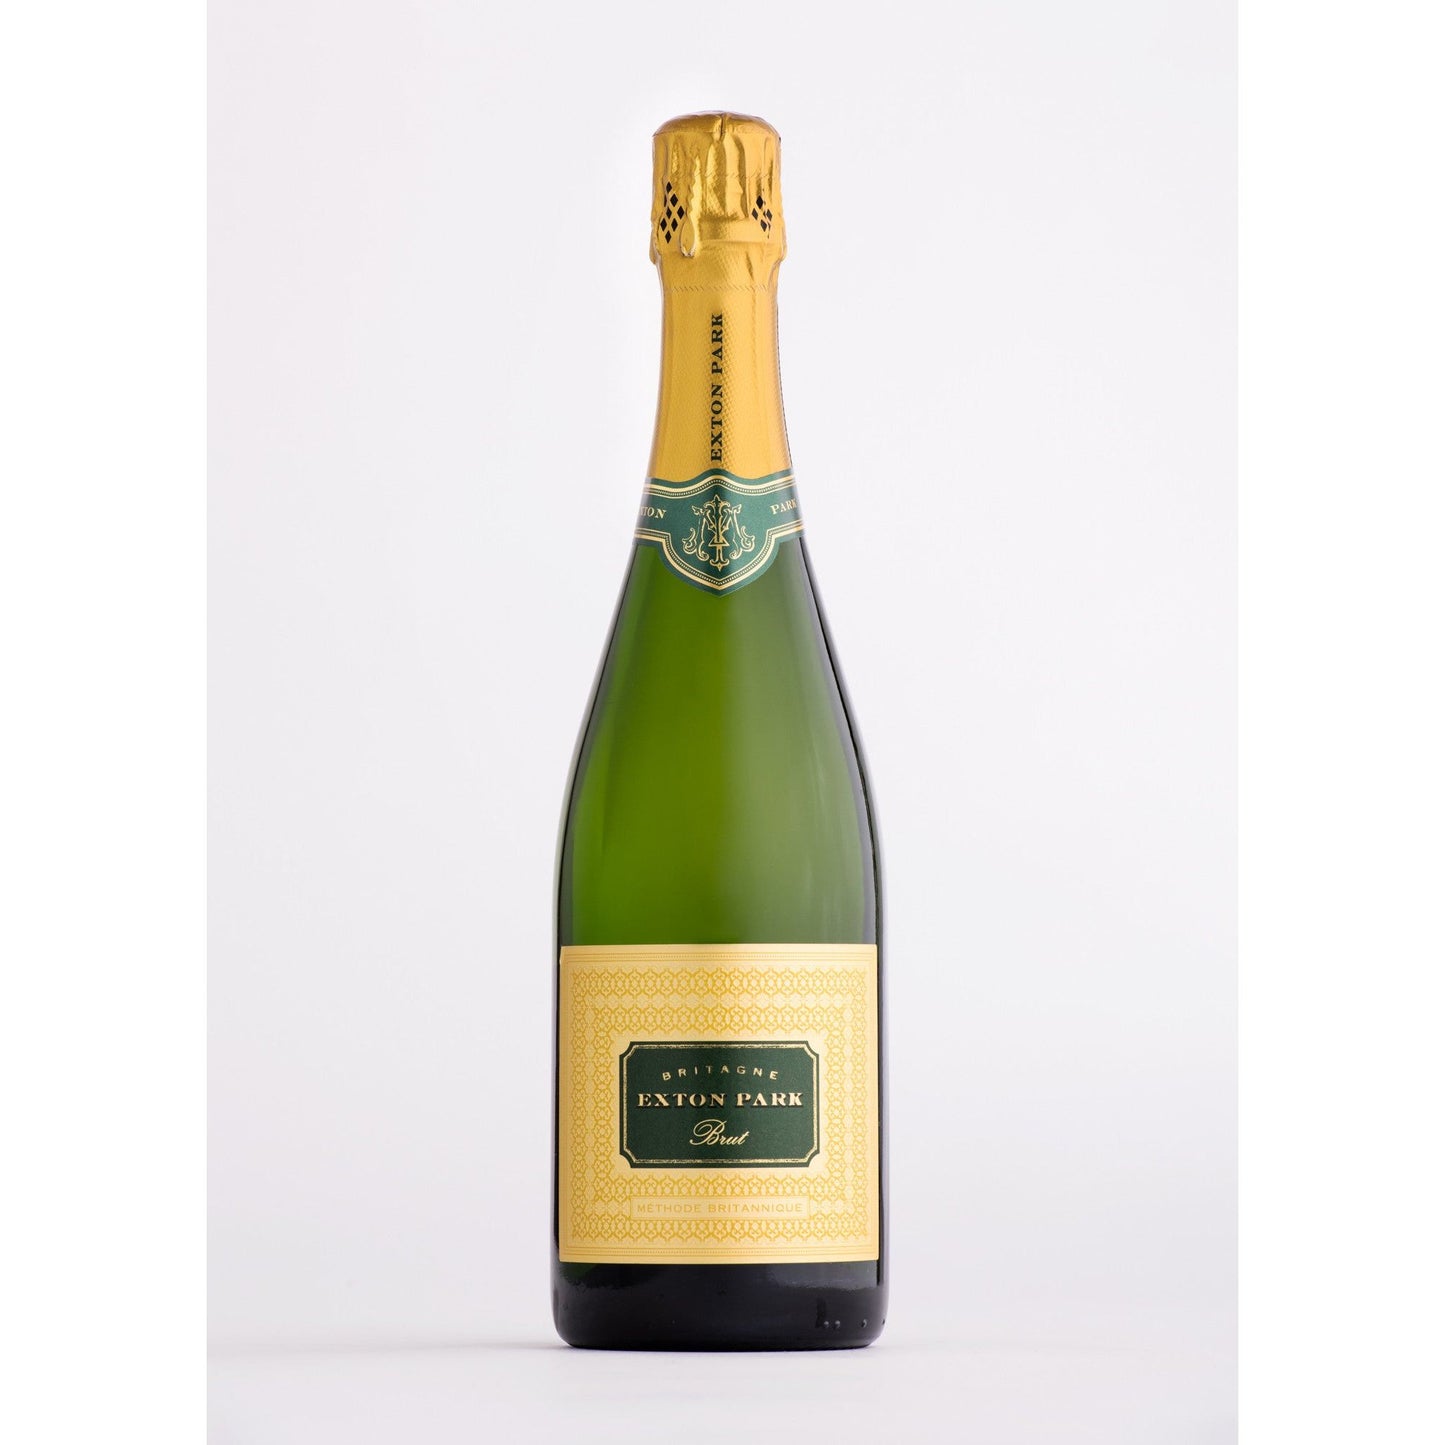 Exton Park Brut Reserve Sparkling White Wine from The English Wine Collection 